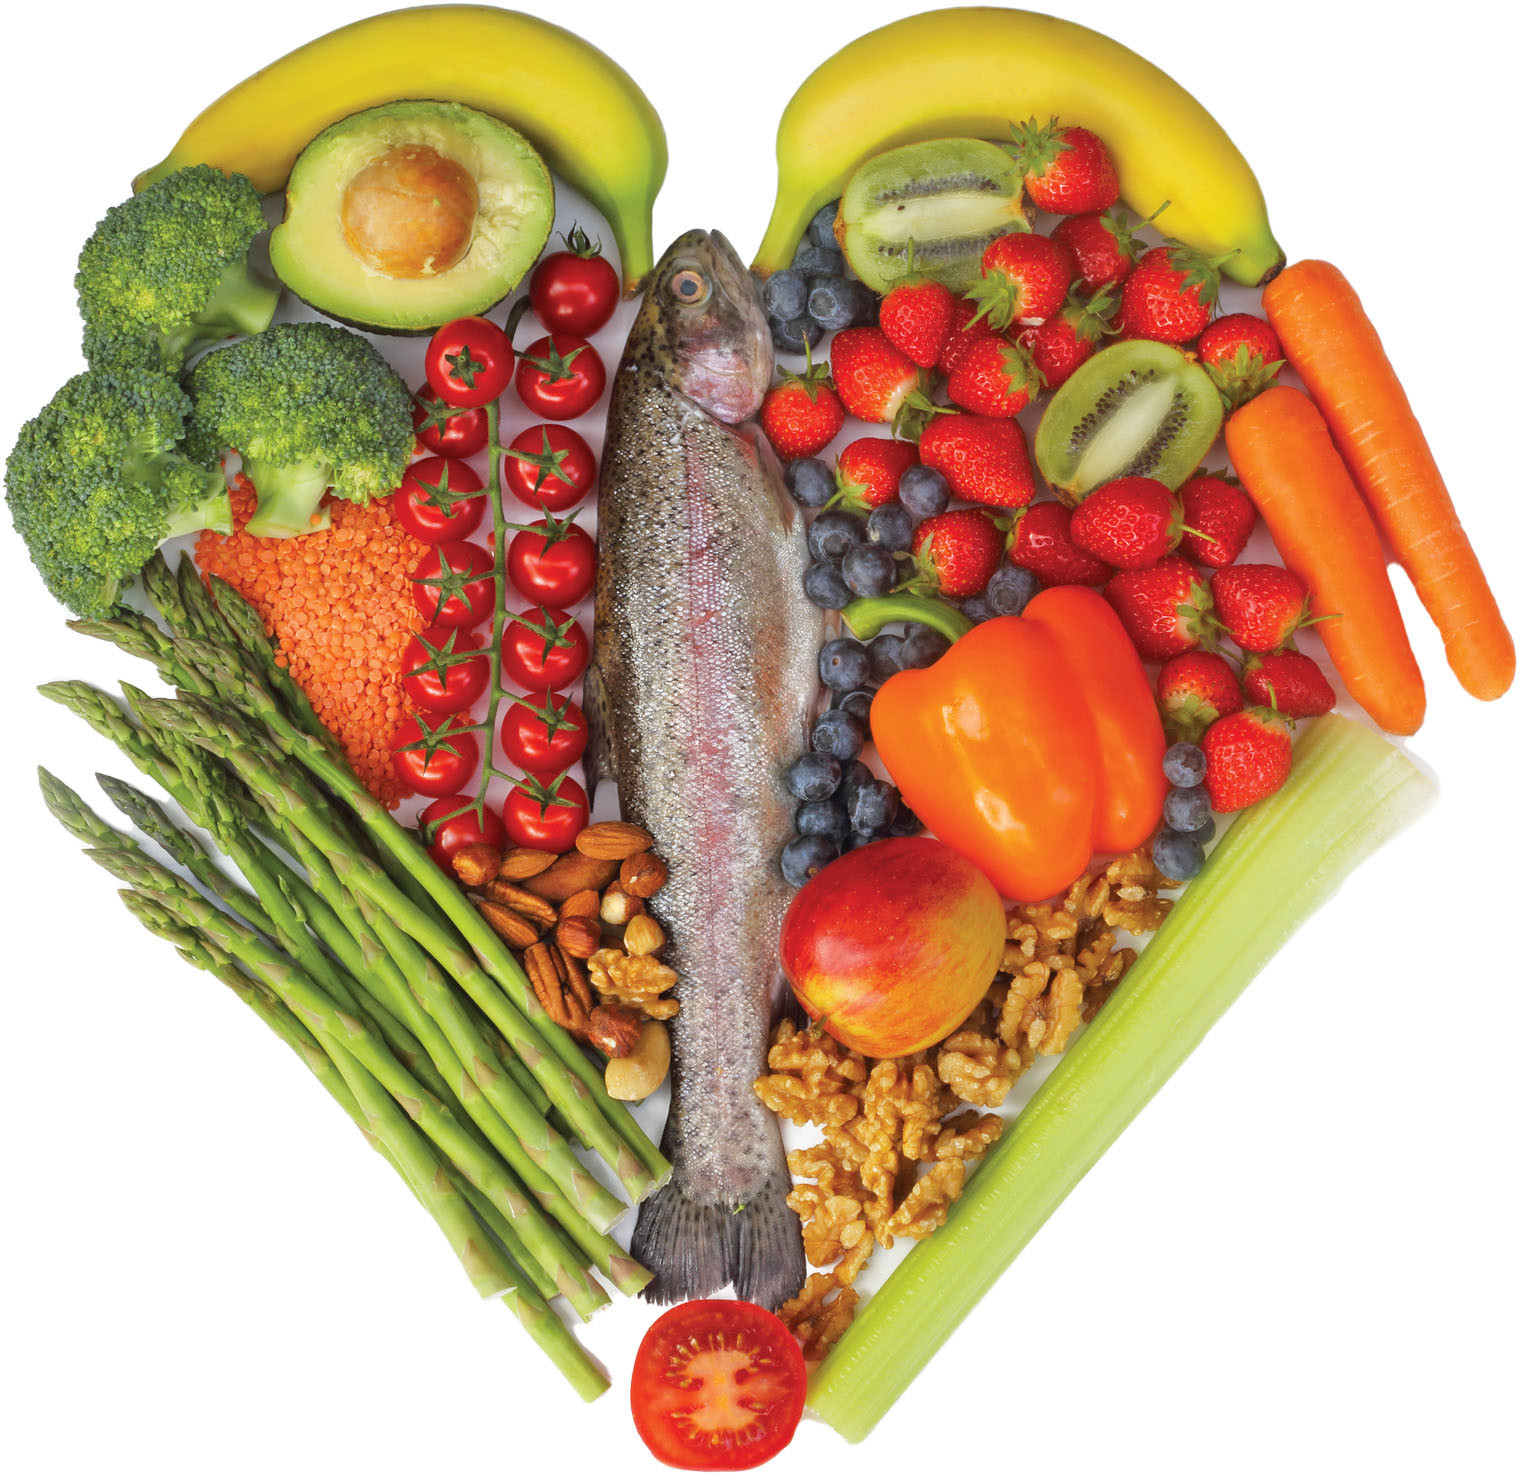 photo of healthy foods arranged in the shape of a heart